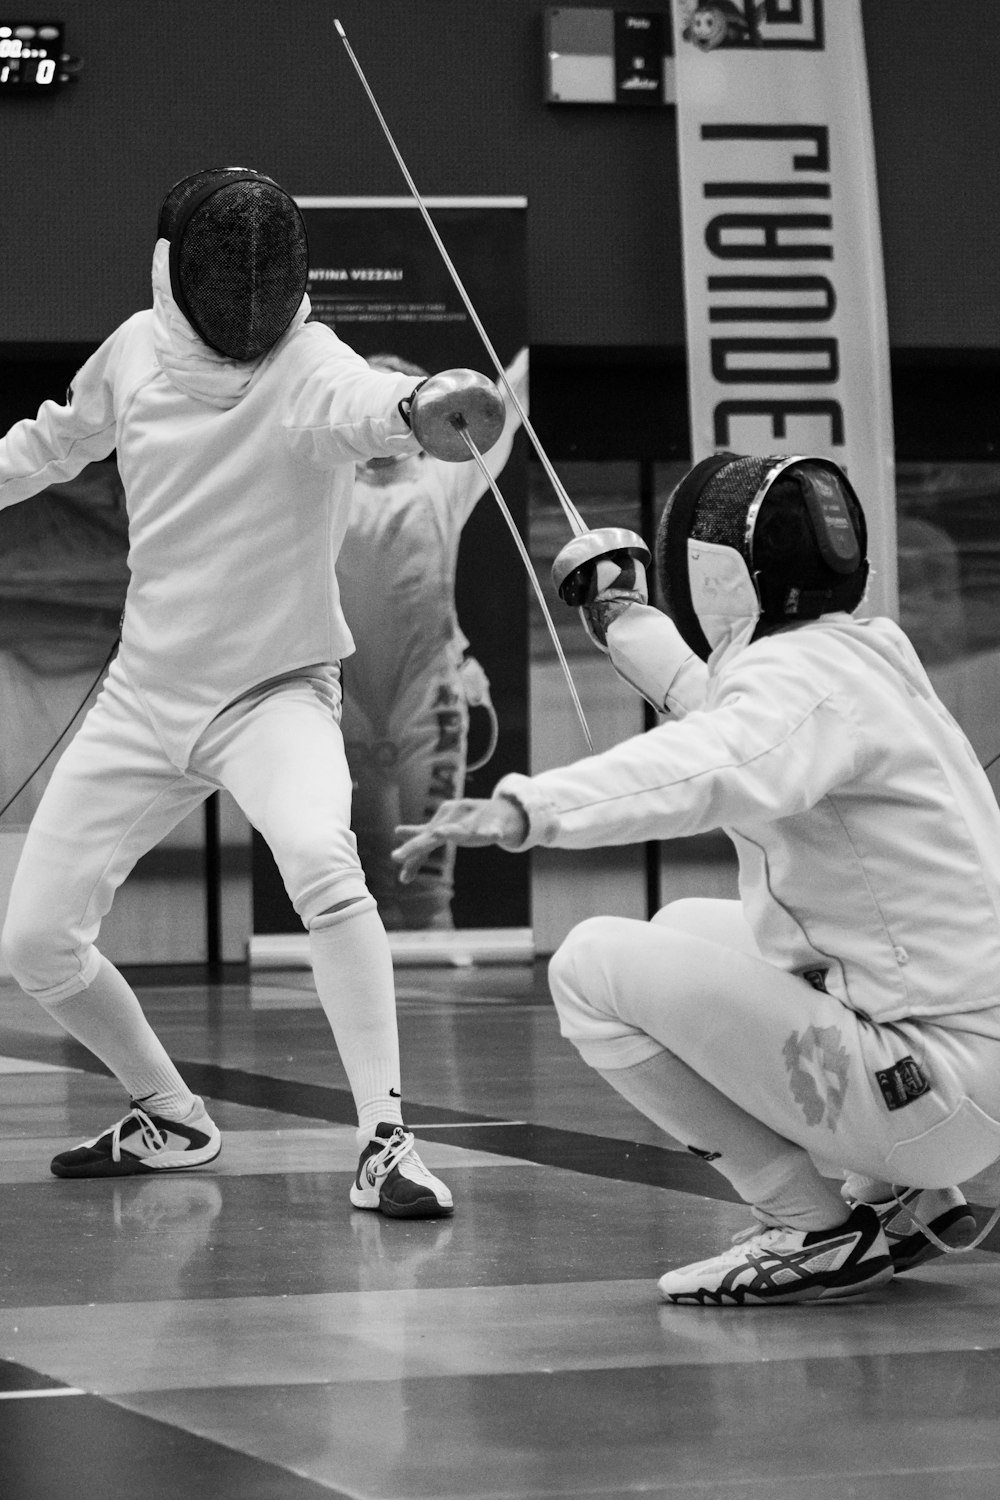 a couple of people on a court with fencing equipment